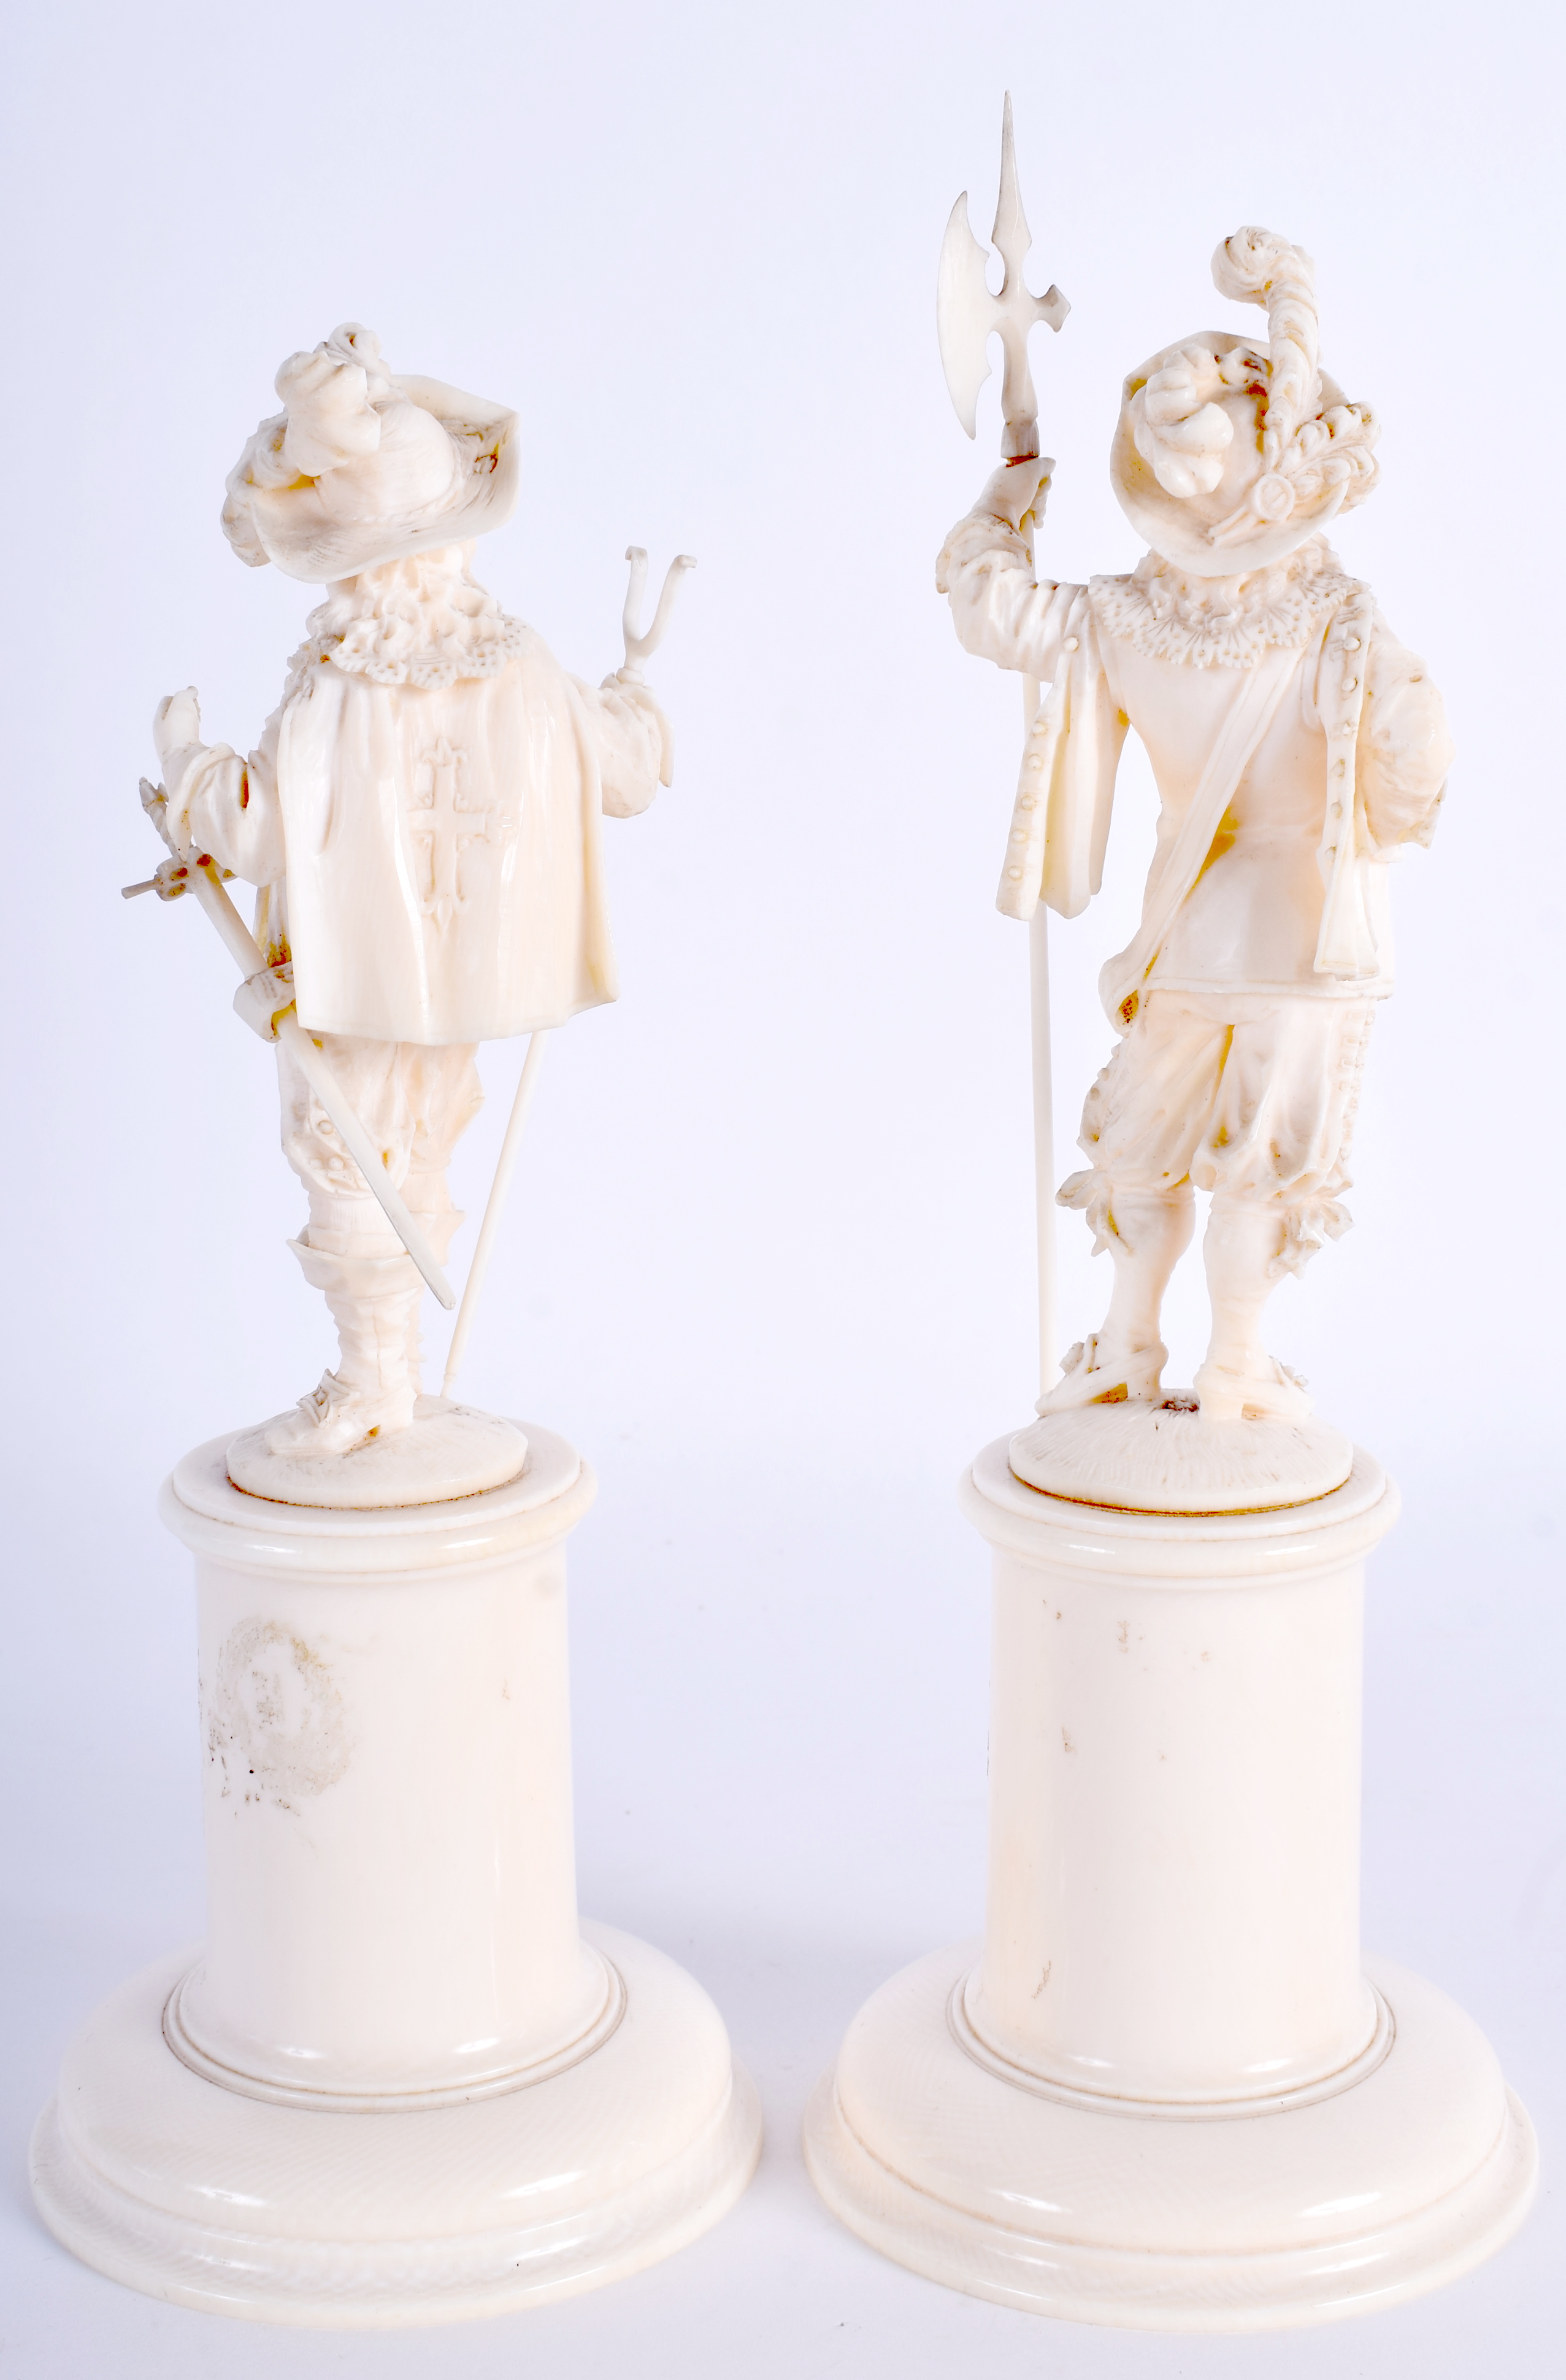 A PAIR OF 19TH CENTURY CONTINENTAL CARVED IVORY DIEPPE CAVALIERS modelled upon pedestals. 21 cm hig - Image 2 of 4